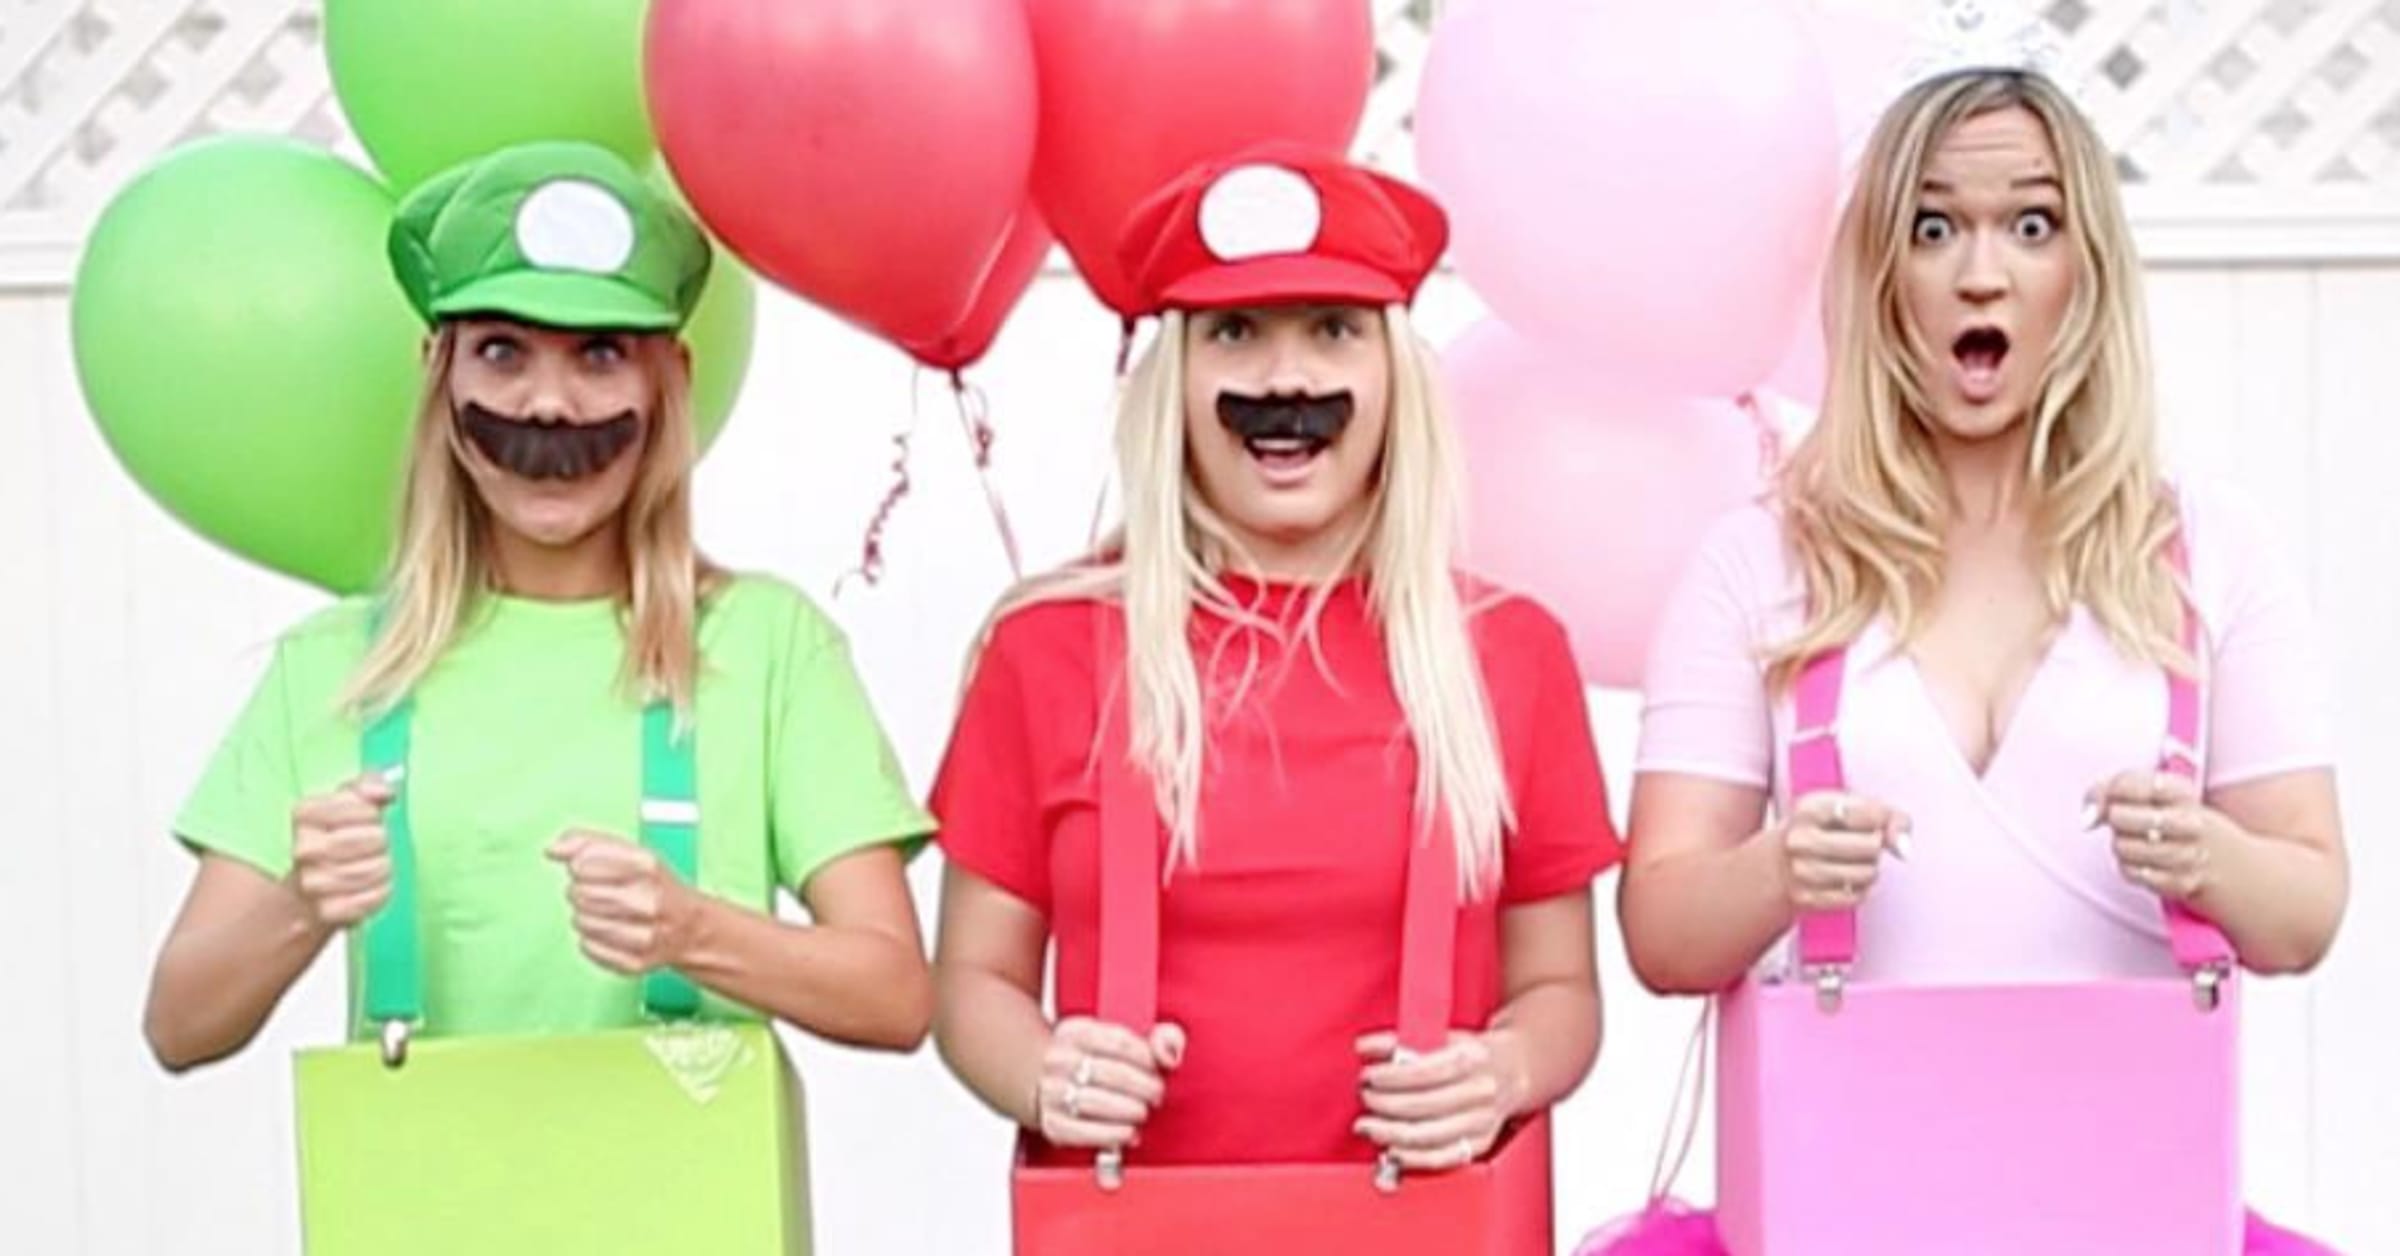 Two It Yourself: DIY M&M Halloween Costume with Matching Hair Bows